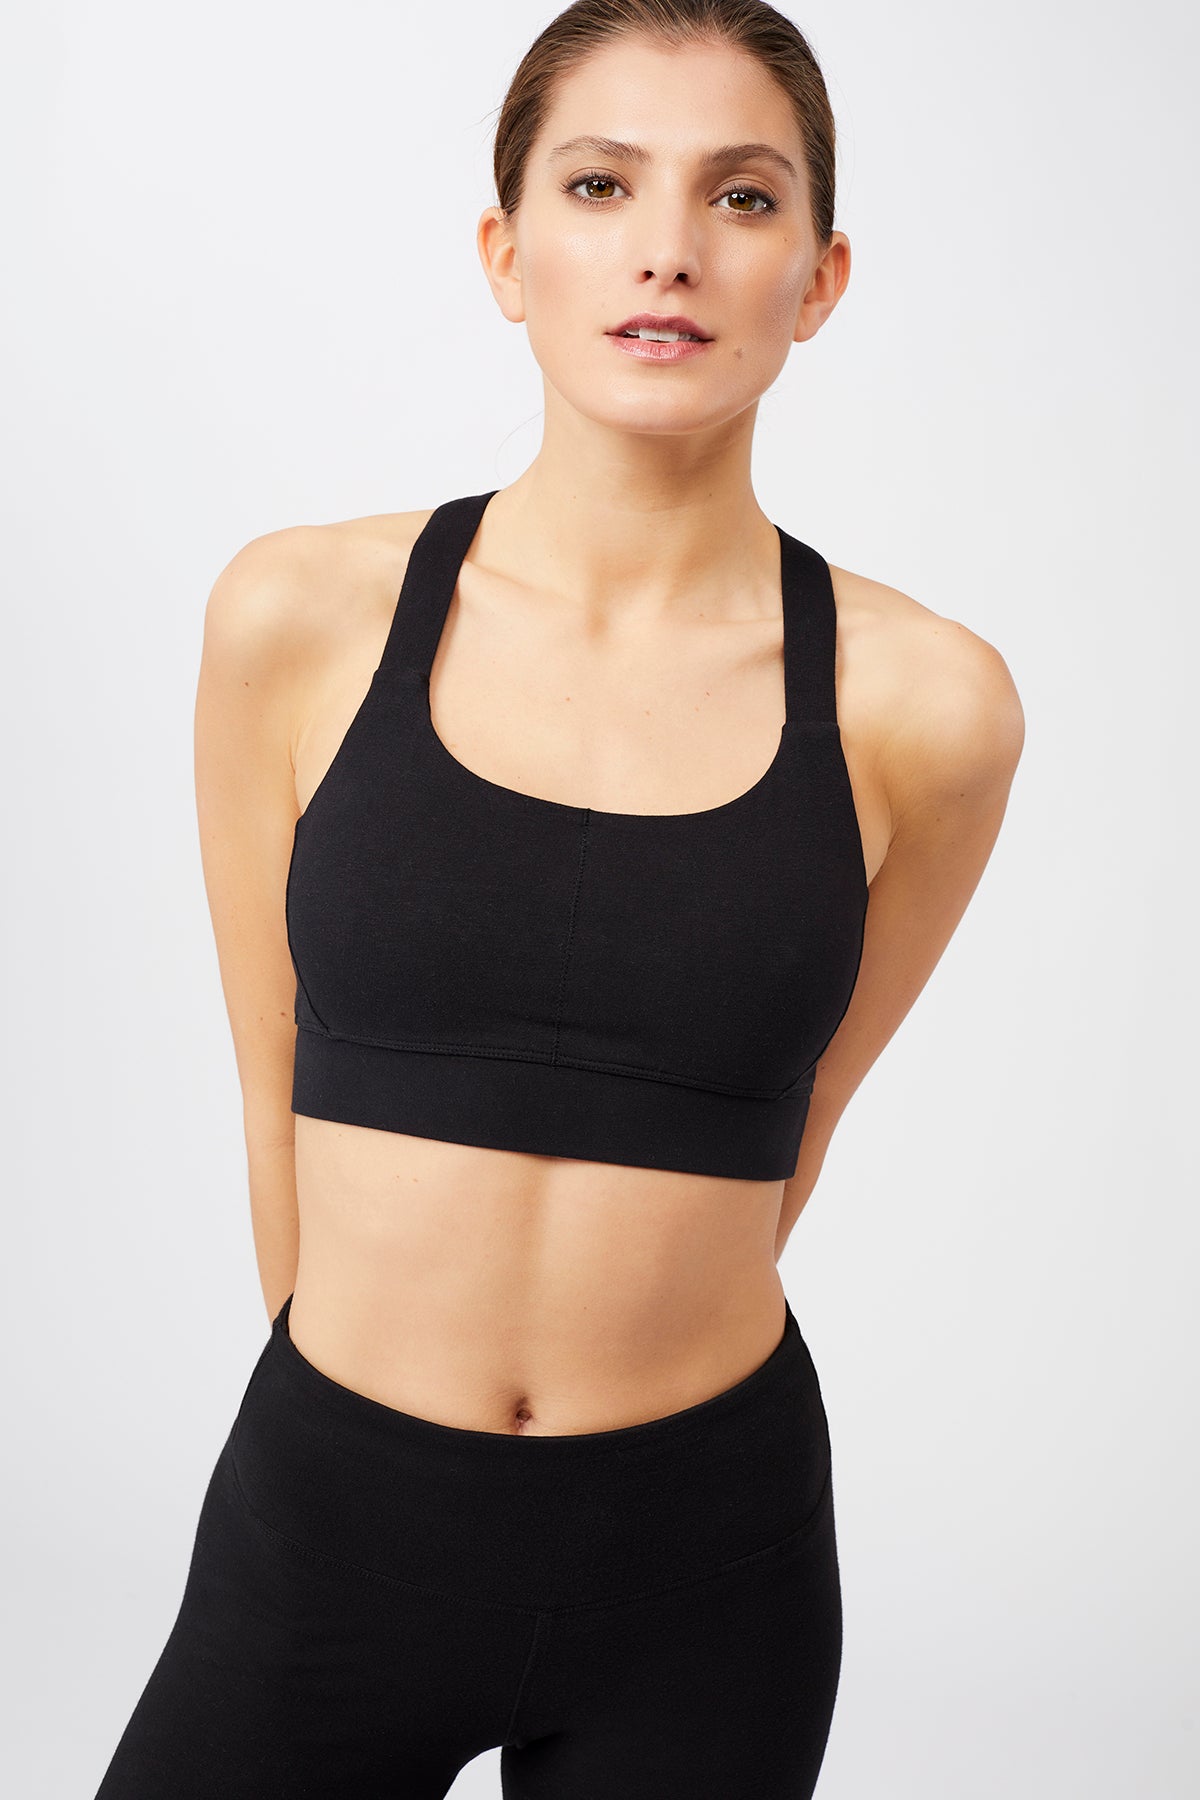 Yoga fashion made from GOTS-certified organic cotton